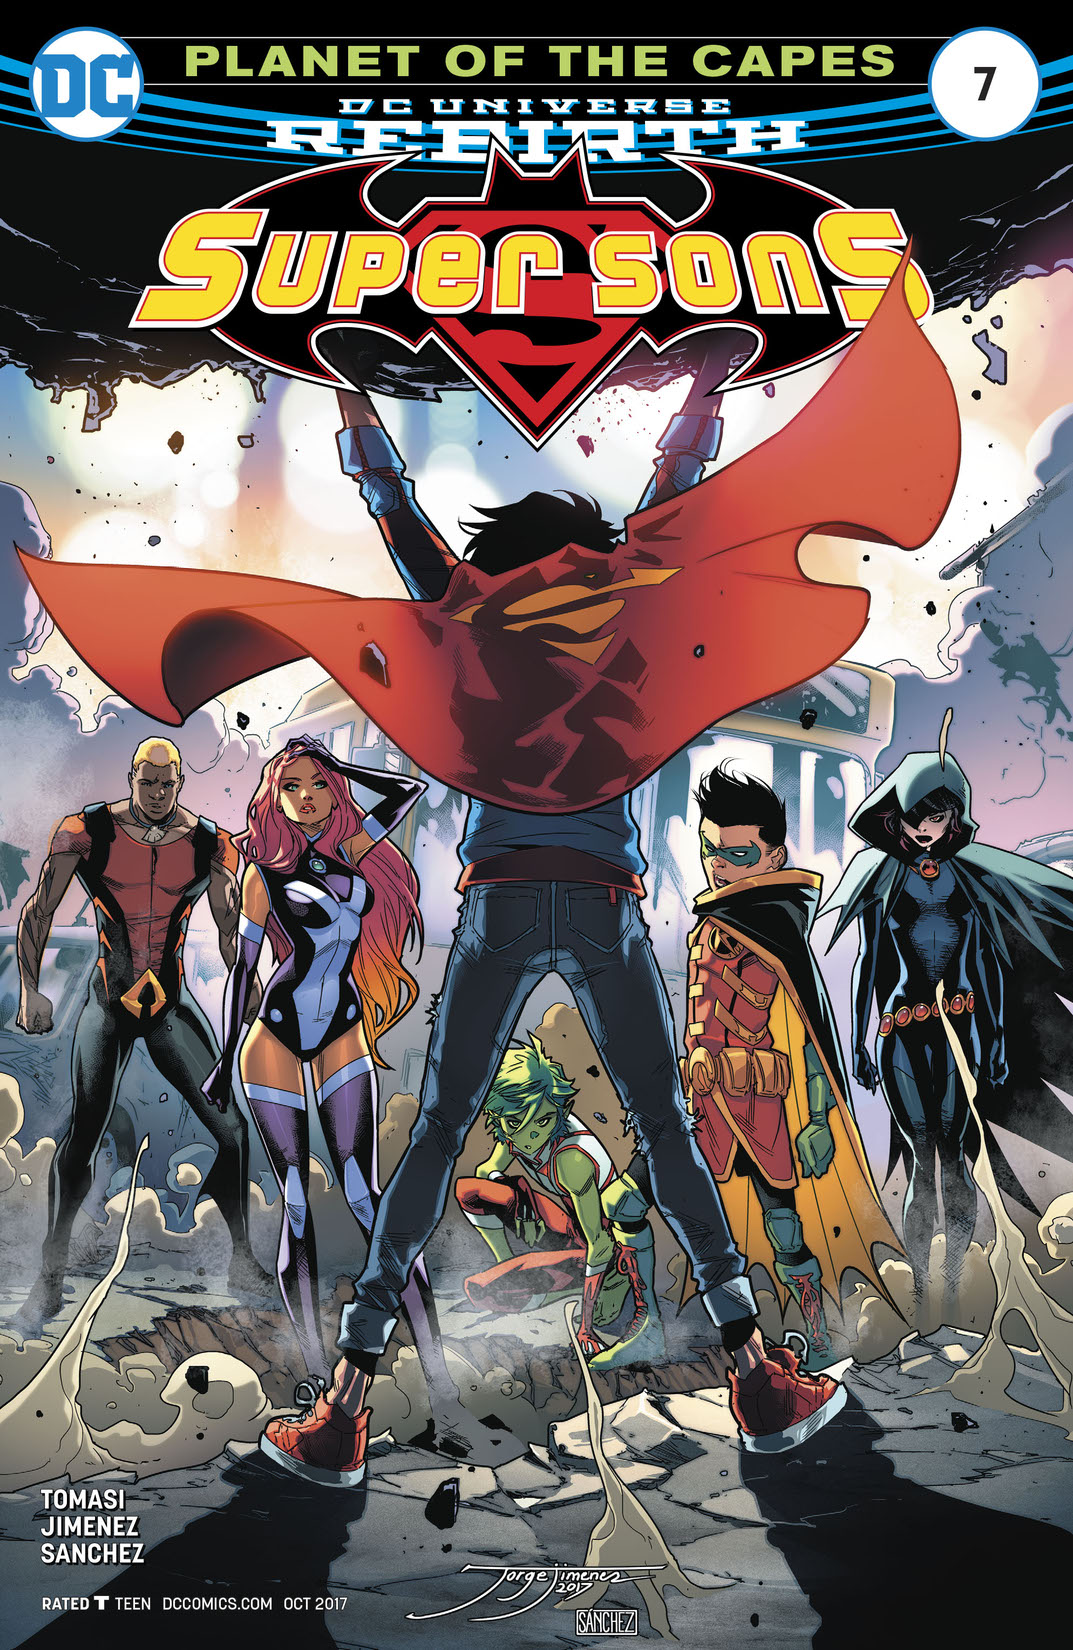 Super Sons (2017-) #7 preview images